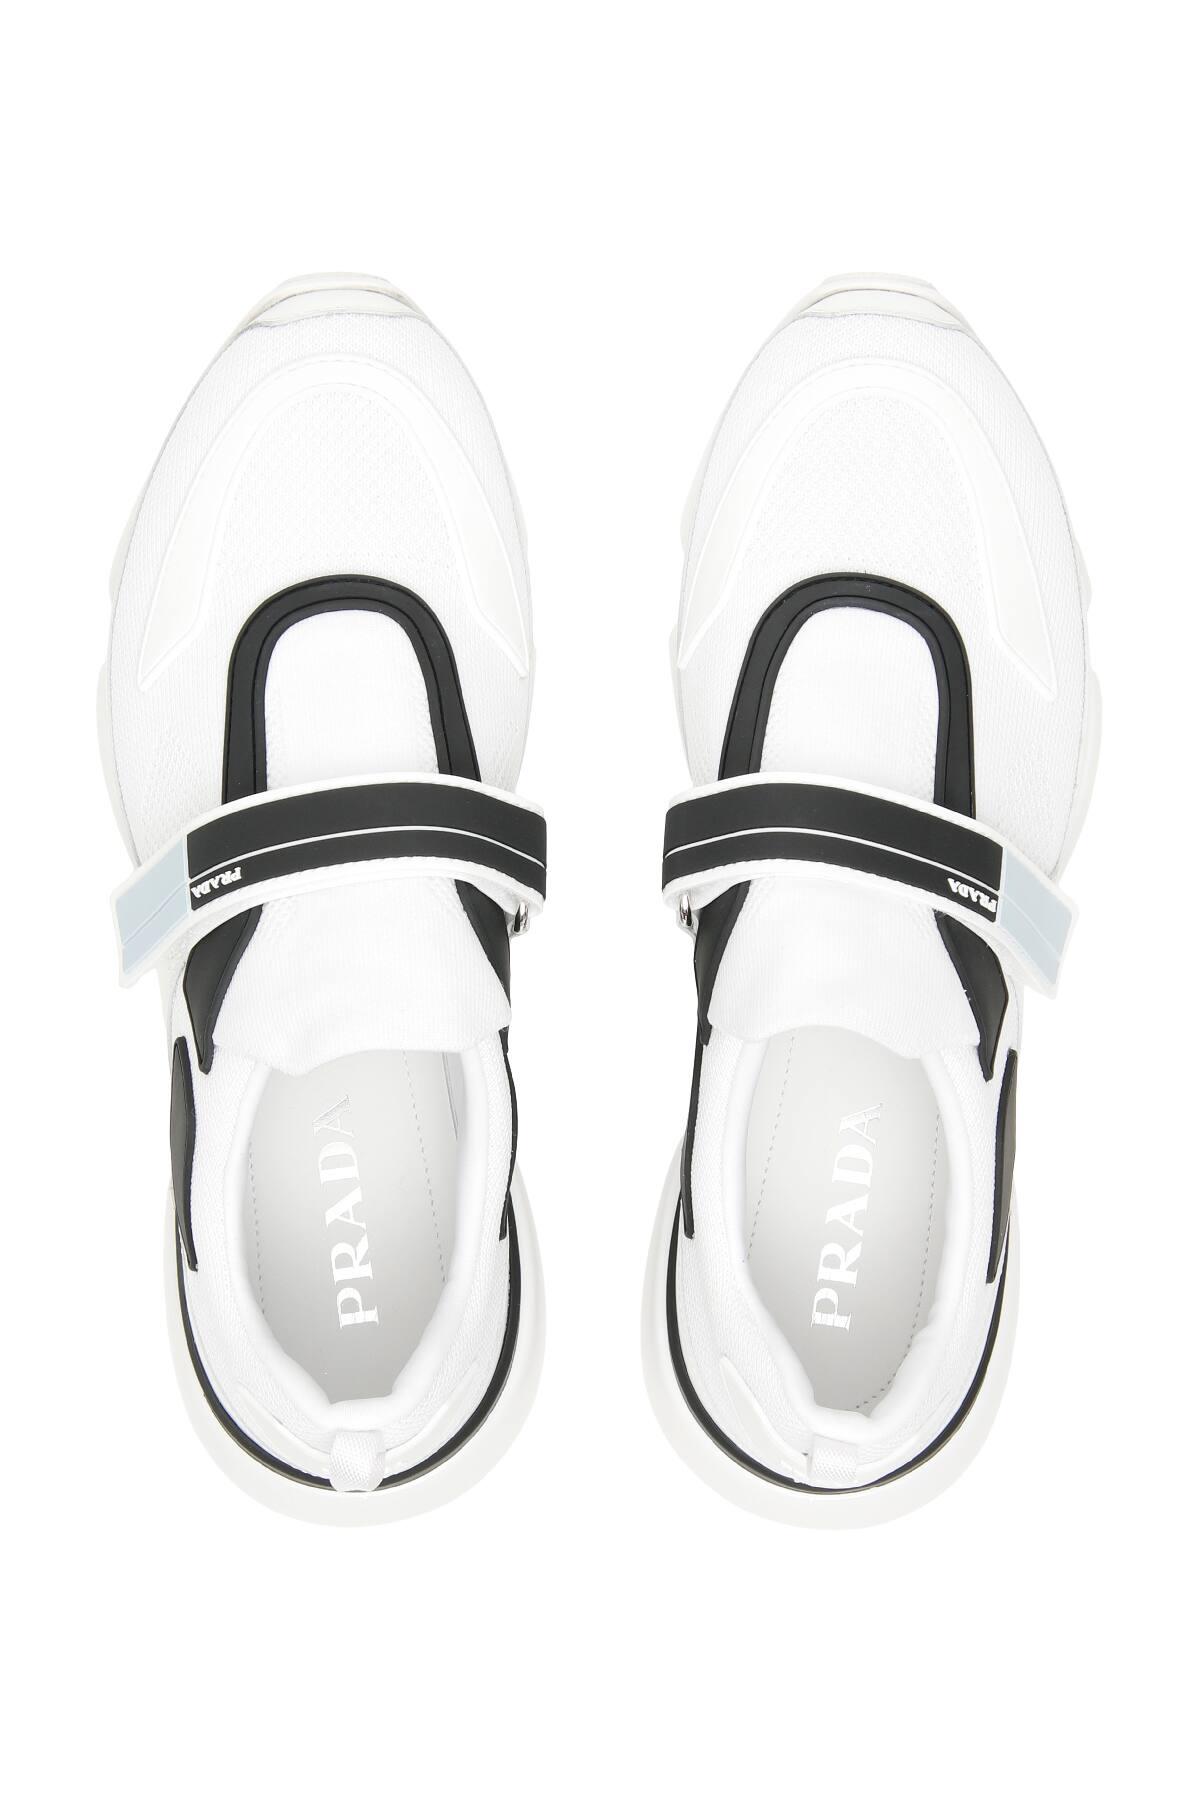 Prada Leather Cloudbust Sneakers in White for Men - Lyst